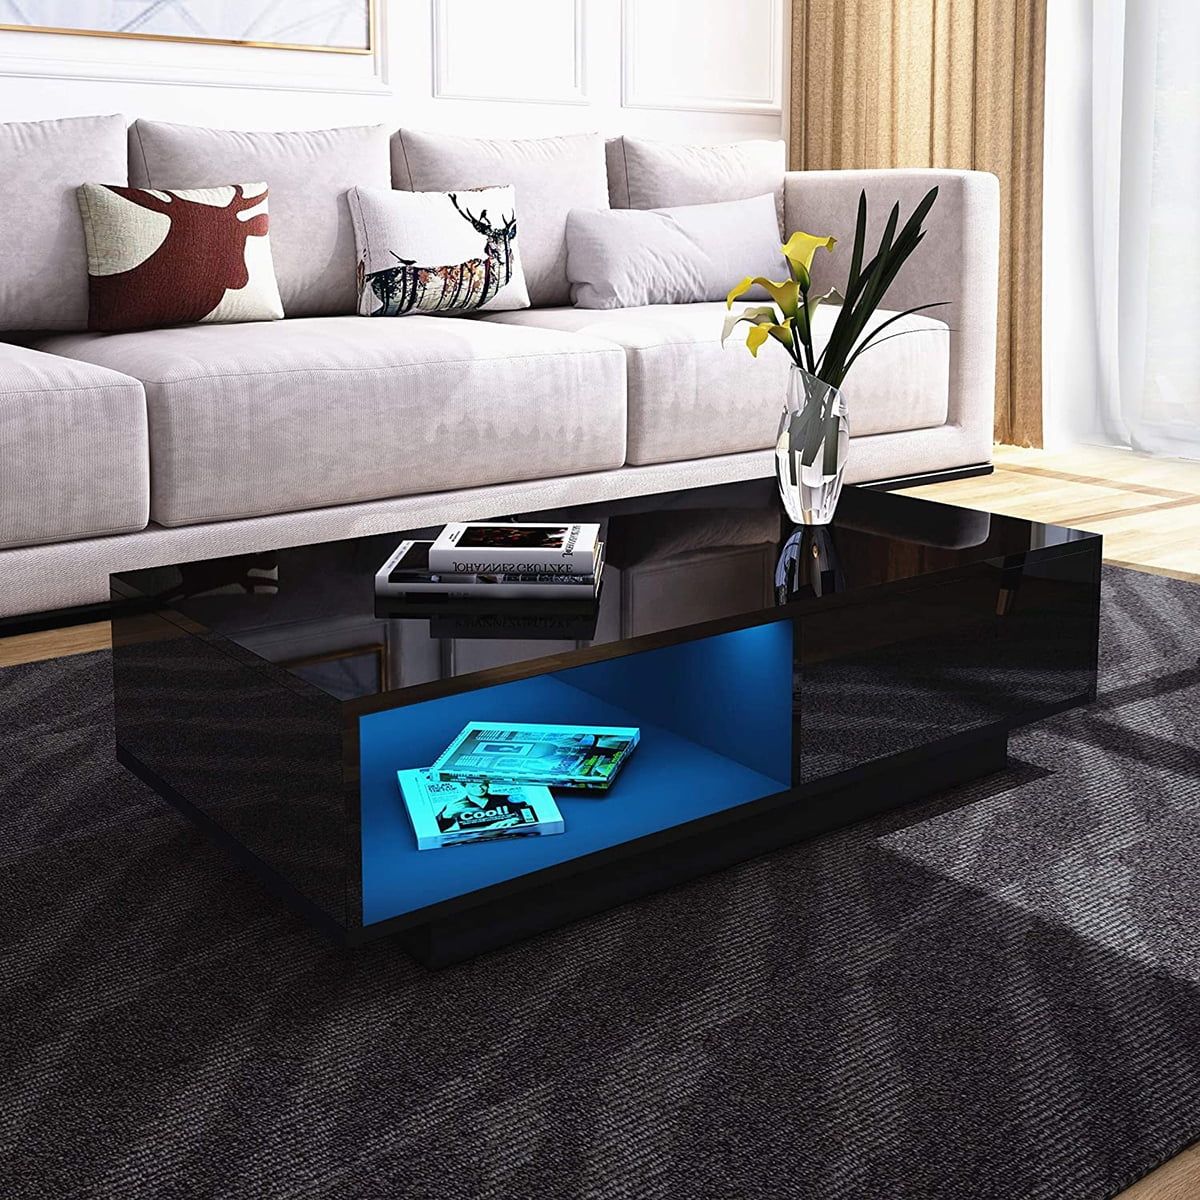 Modern High Gloss Coffee Table With Drawers, Led Sofa Side End Desk Inside Coffee Tables With Drawers And Led Lights (View 6 of 20)